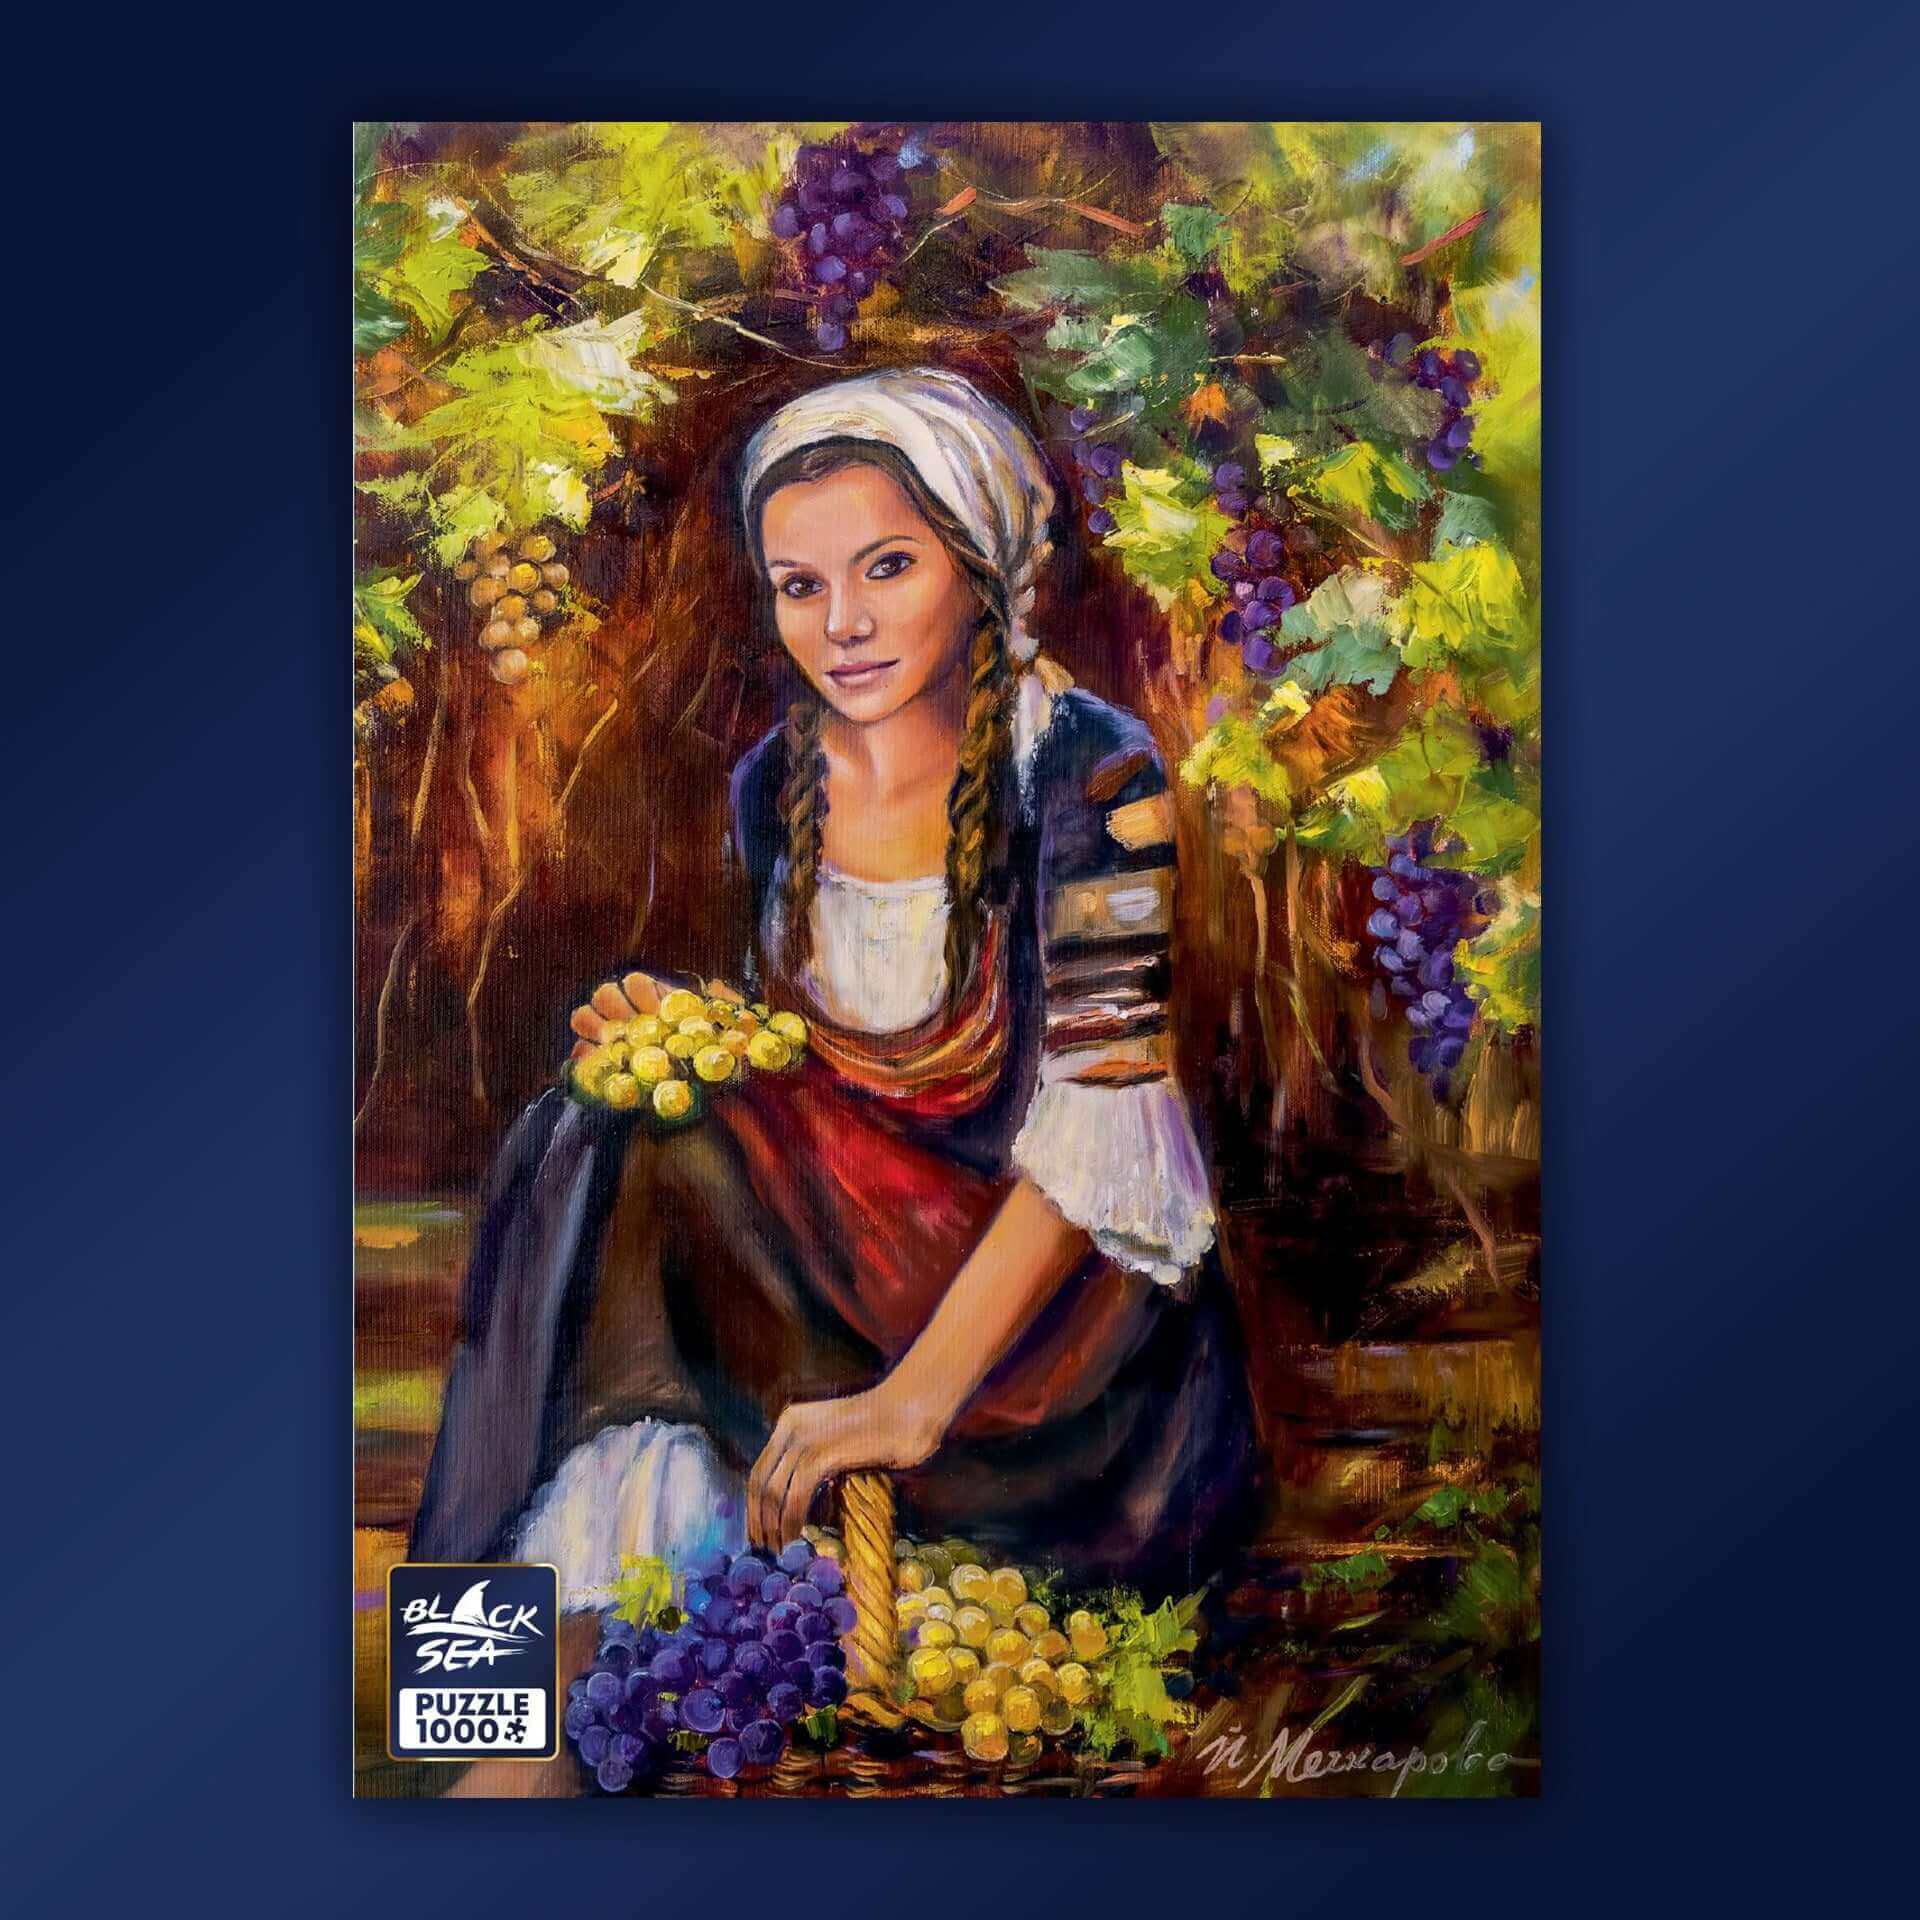 Puzzle Black Sea Premium 1000 pieces - Under the Old Vine, According to the old Bulgarian tradition grapes should be picked on Feast of the Cross when the fruits are ripe, sweet and aromatic. A woman should pick them, as a woman’s more delicate hands will